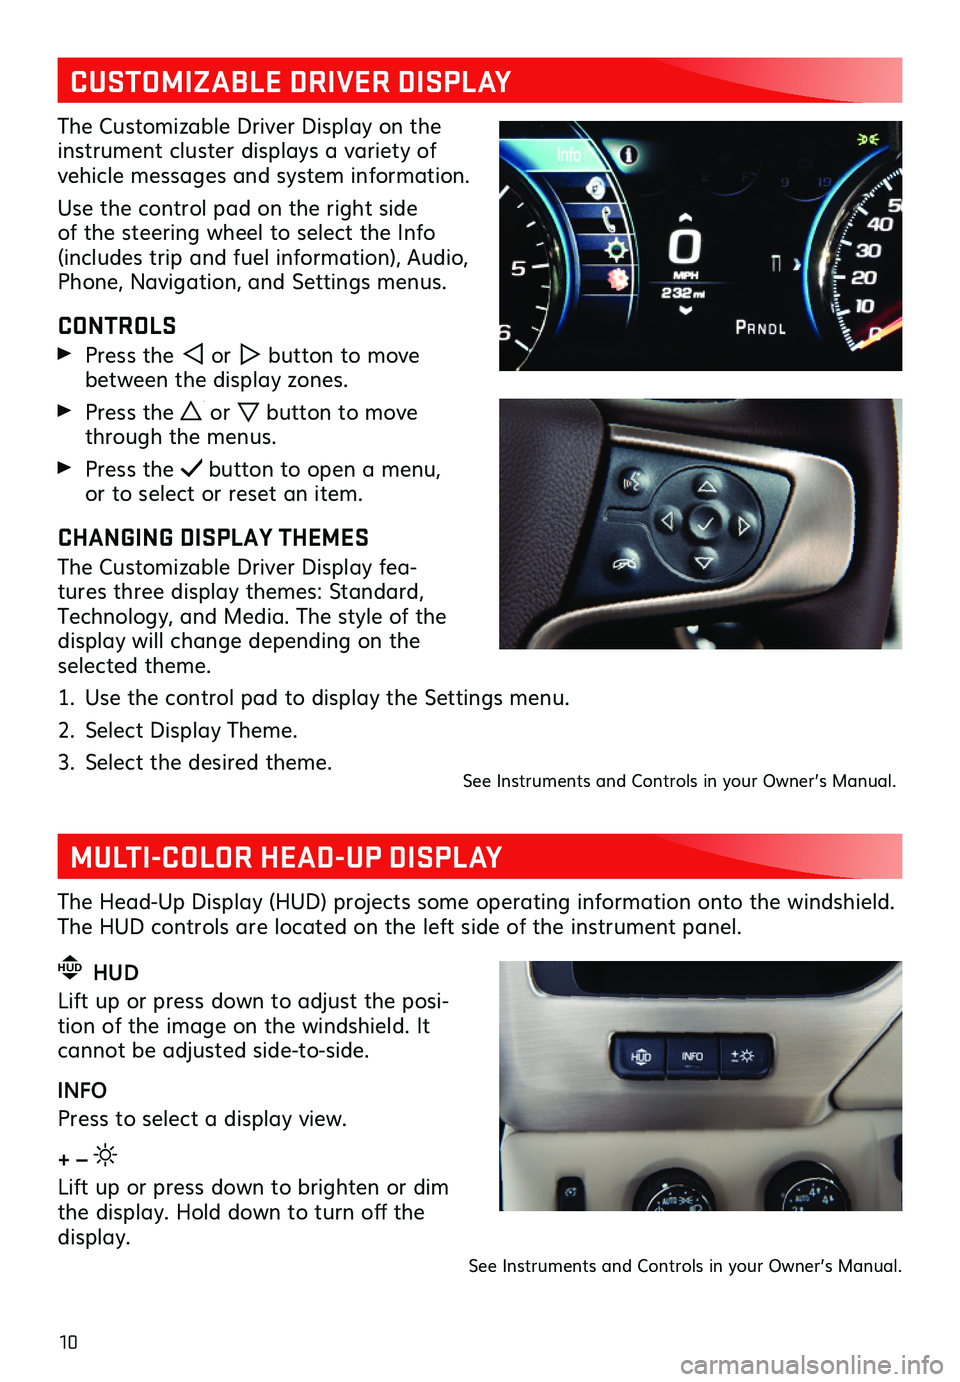 GMC YUKON 2019  Get To Know Guide 10
MULTI-COLOR HEAD-UP DISPLAY
The Head-Up  Display (HUD) projects  some  operating  information  onto the windshield. The HUD controls are located on the left side of the instrument panel.